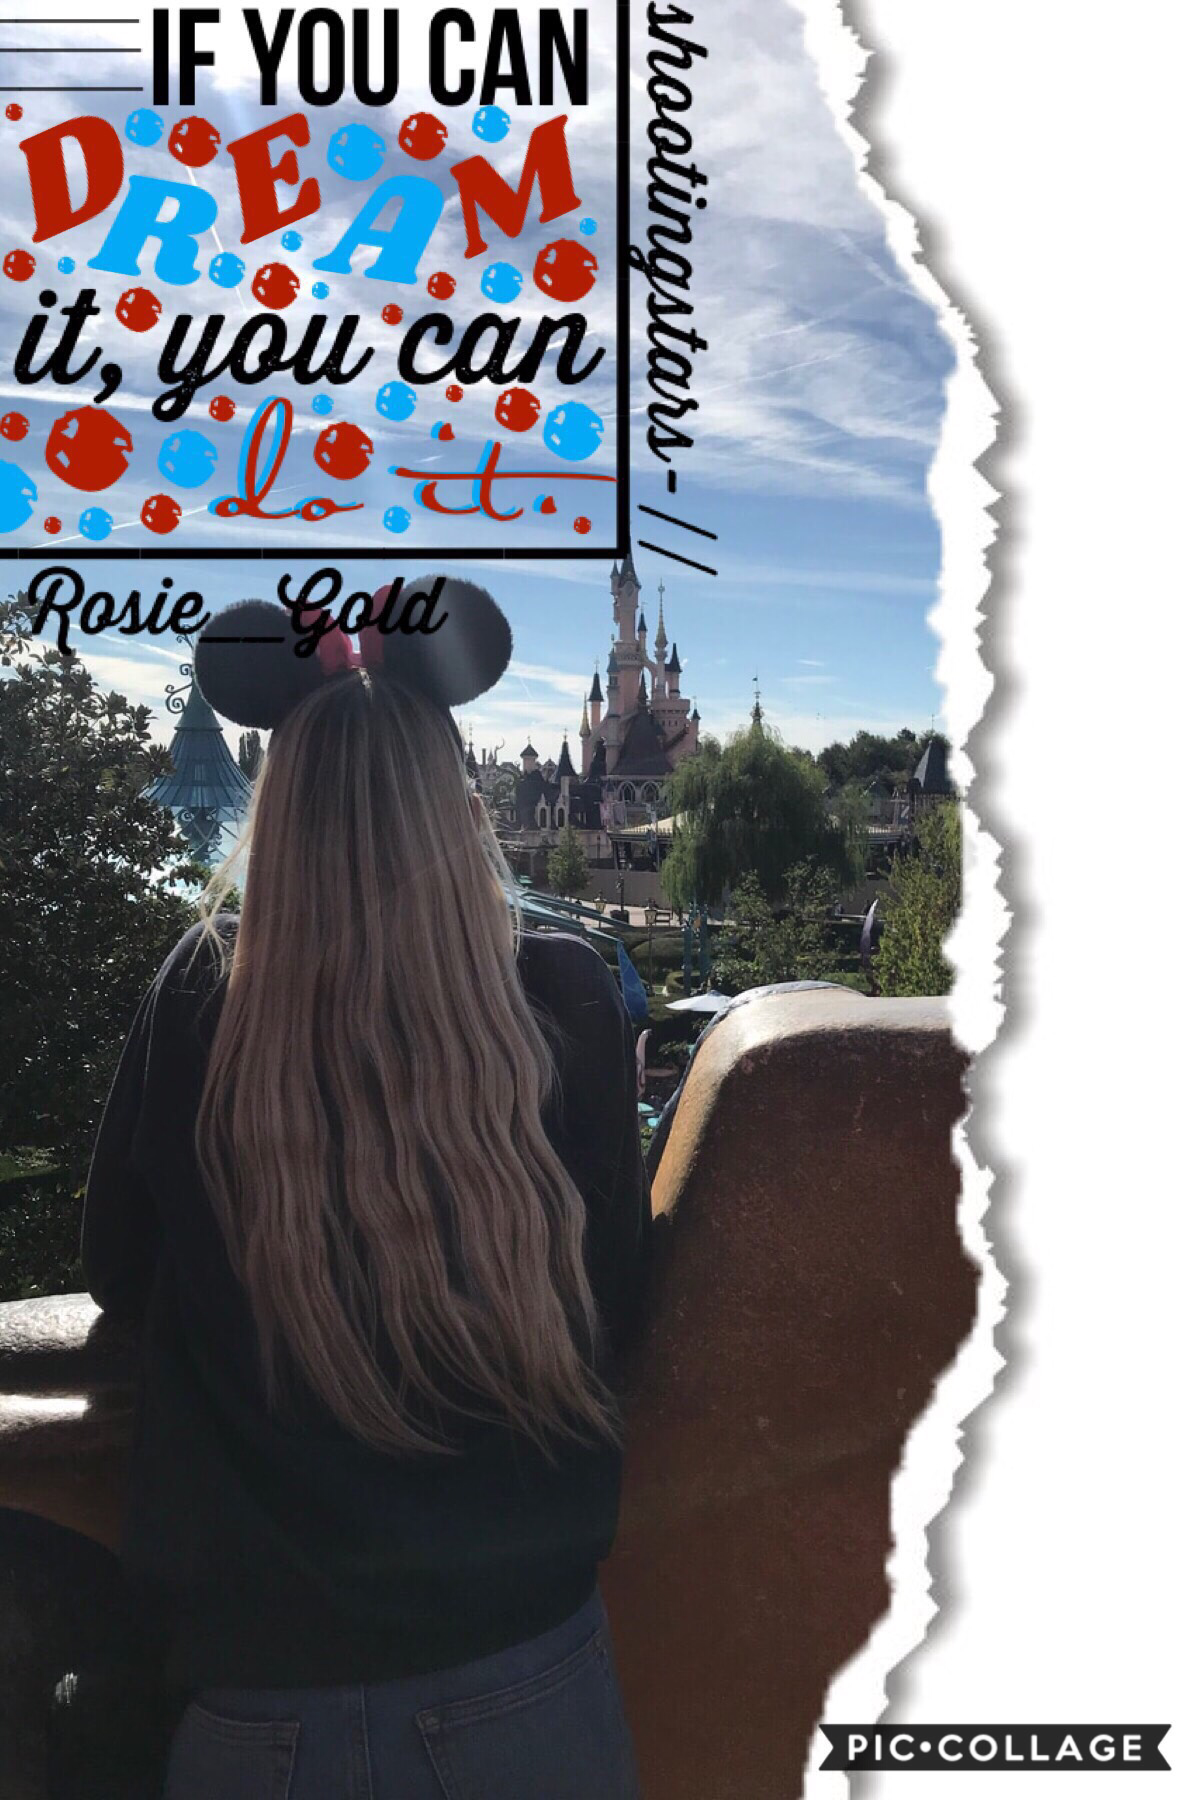 🐭tap🐭
Collab with.... shootingstars-

She did the text and stuff pngs and I chose the background

Qotd; fave Disney park?
Aotd: Epcot!!!